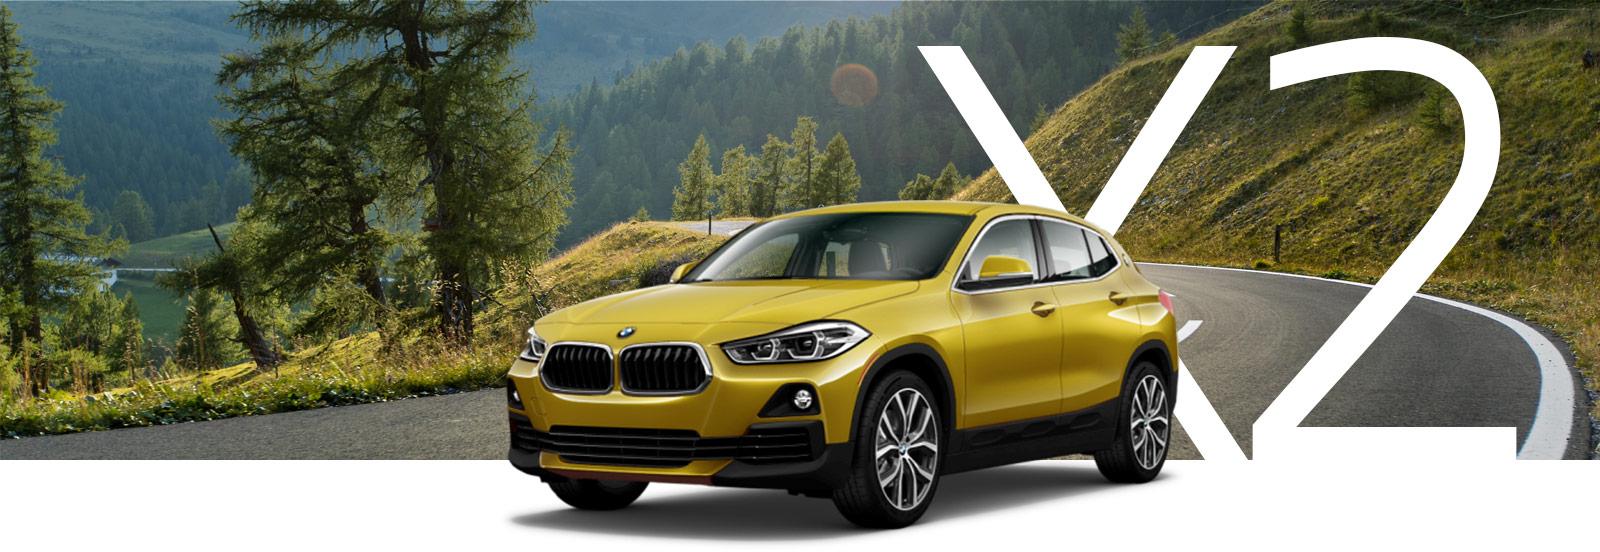 A gold BMW X2 on a curvy mountain road.